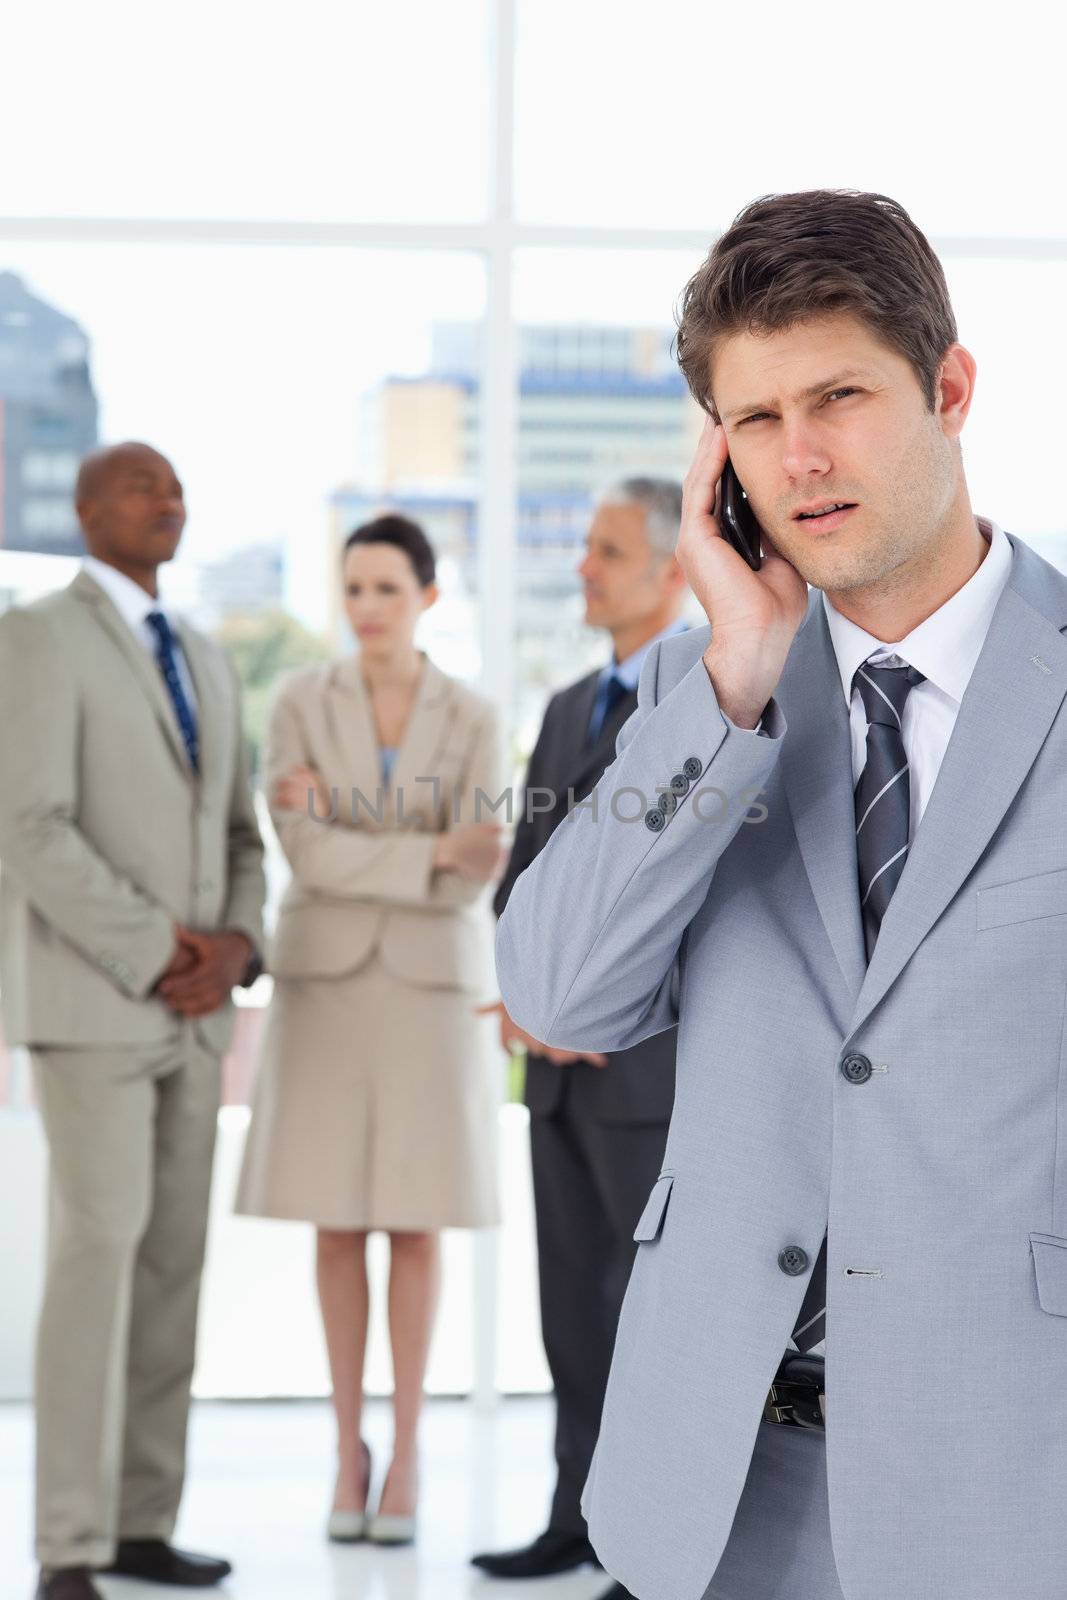 Serious businessman using a cell phone while his team is behind  by Wavebreakmedia